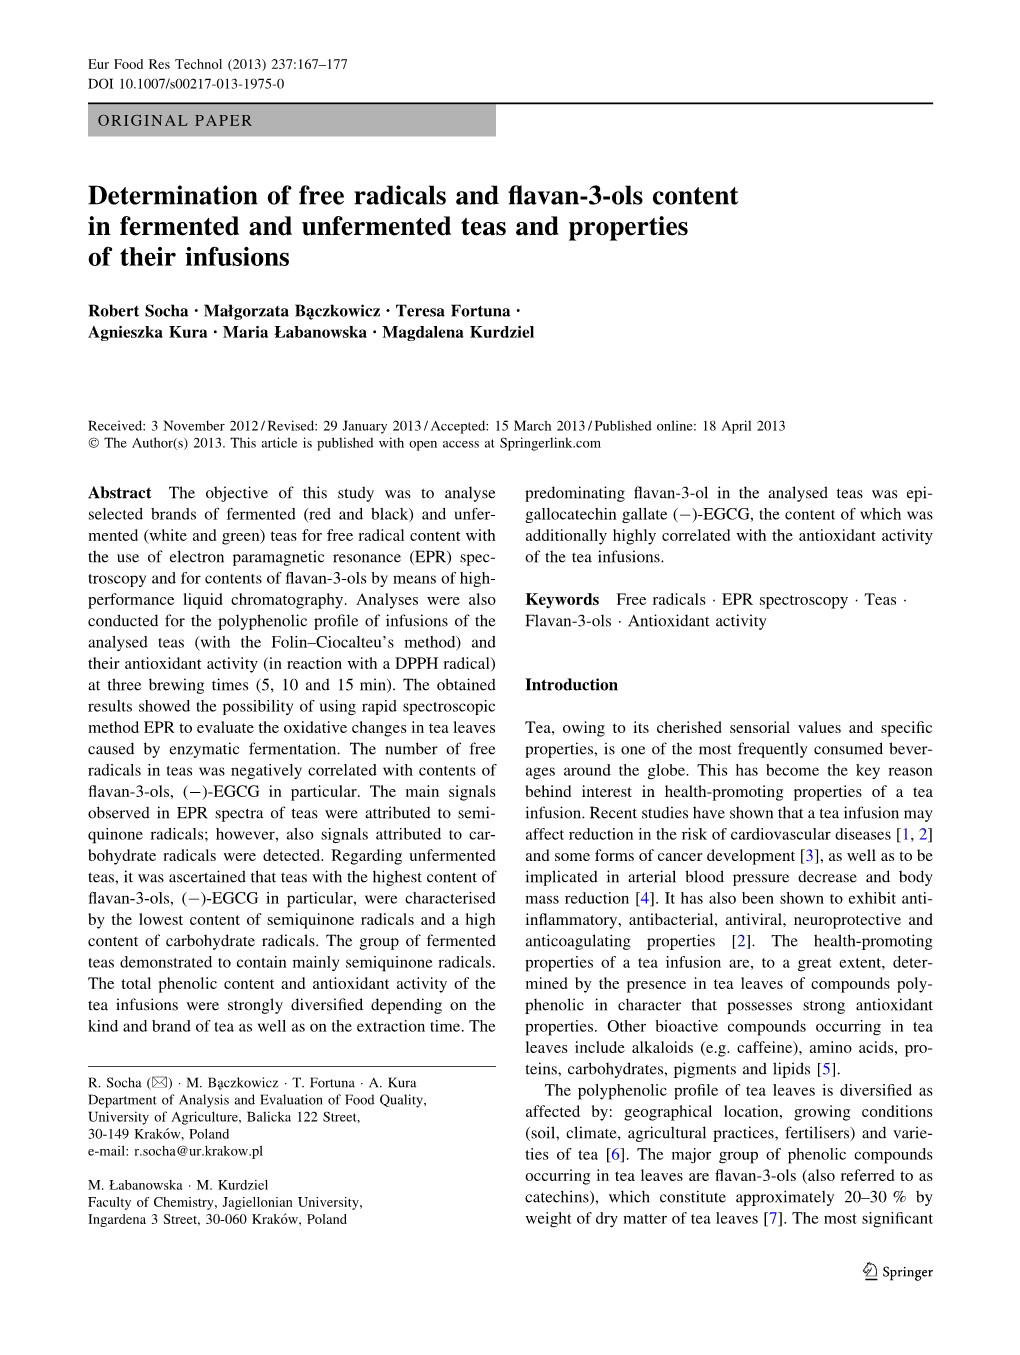 Determination of Free Radicals and Flavan-3-Ols Content in Fermented